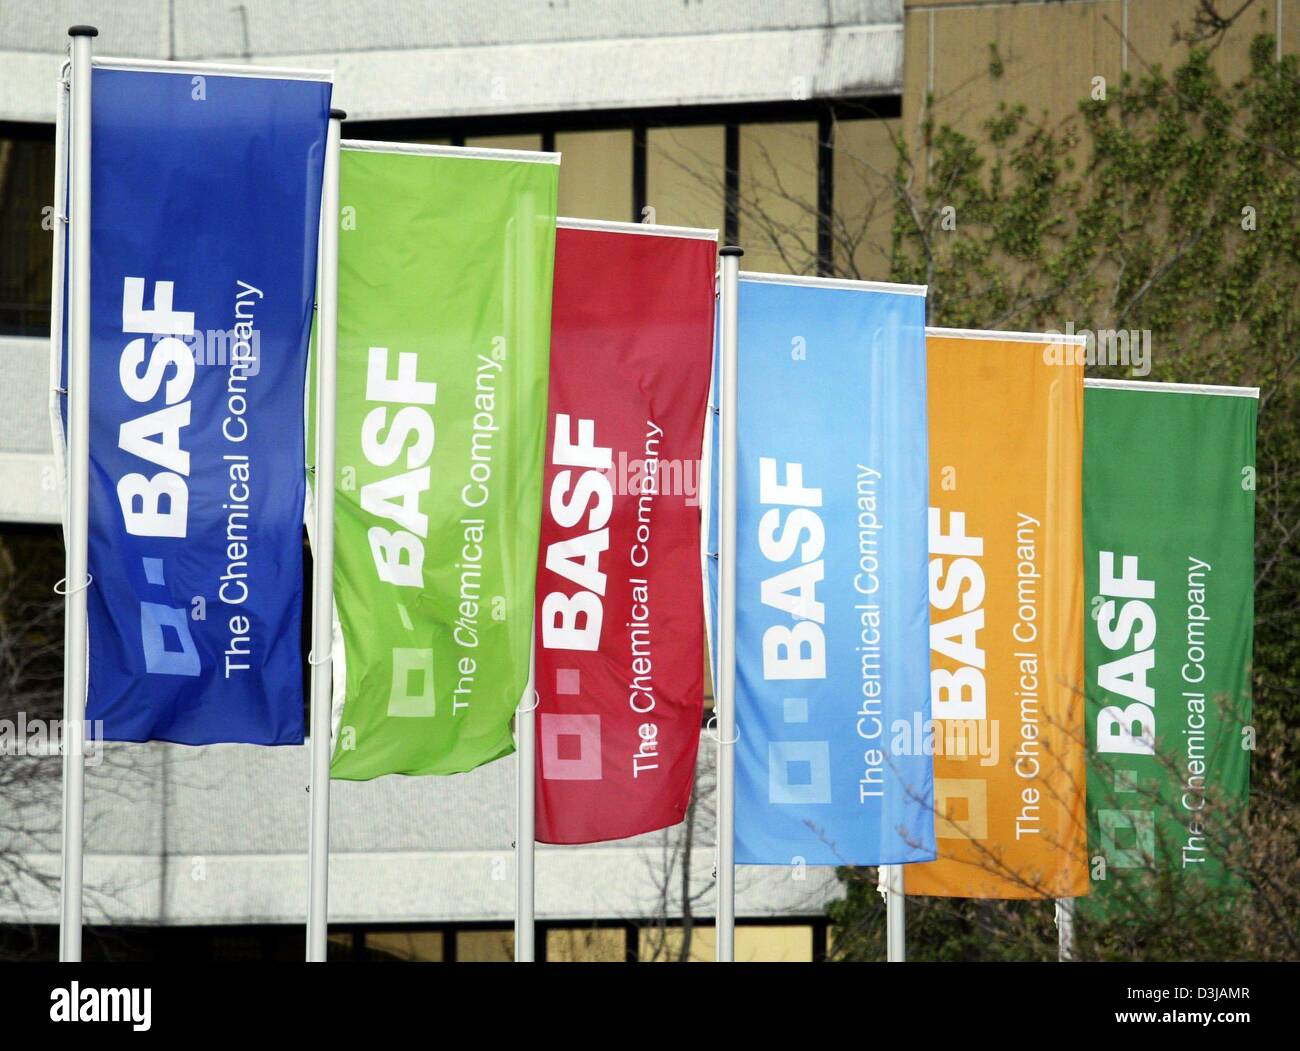 dpa-colourful-flags-featuring-the-new-logo-of-basf-chemical-group-D3JAMR